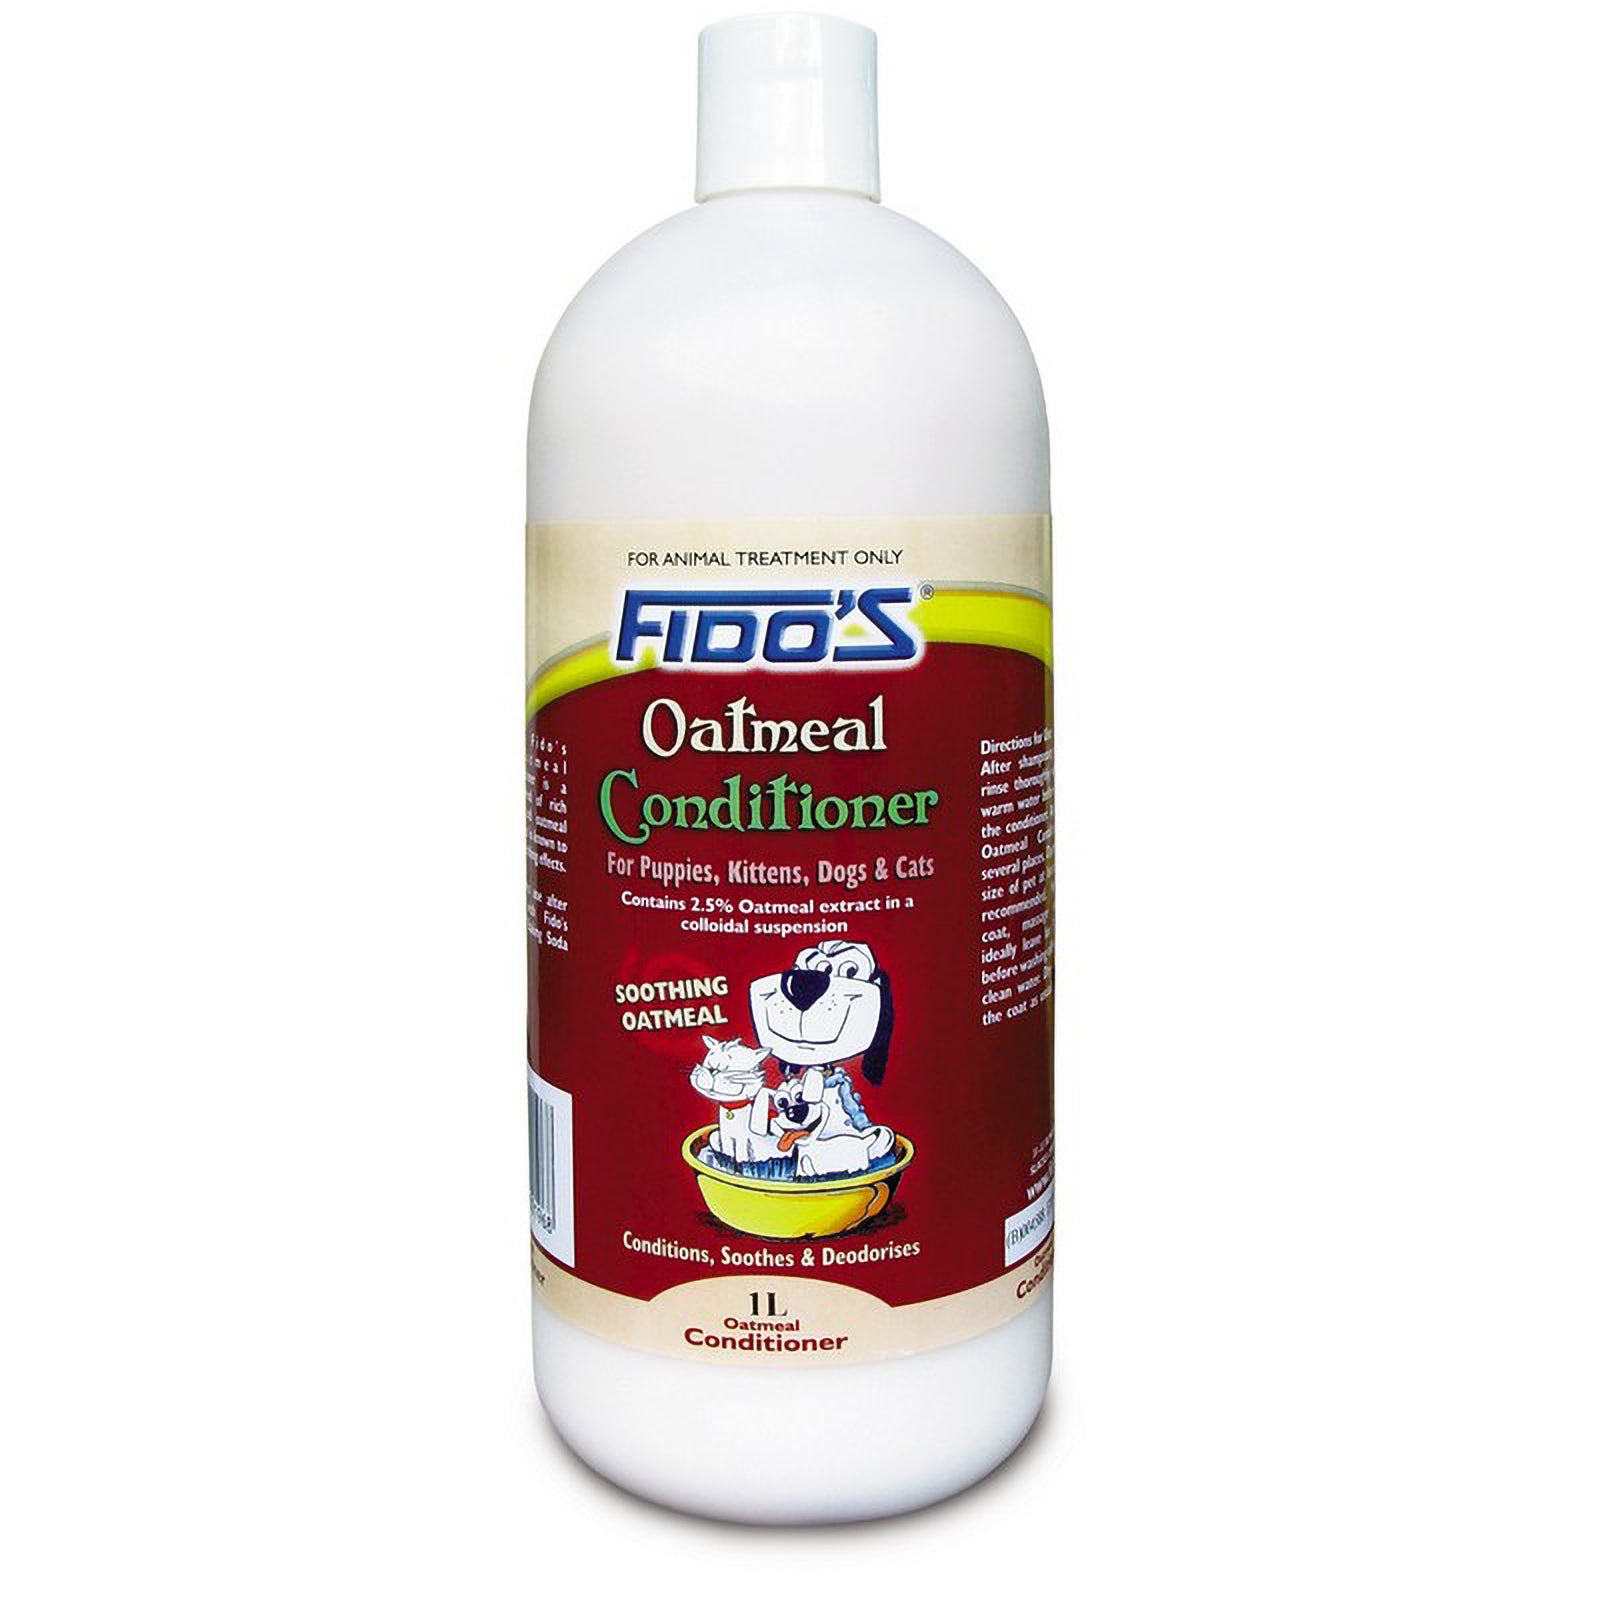 Fido's Oatmeal Conditioner for Dogs & Cats